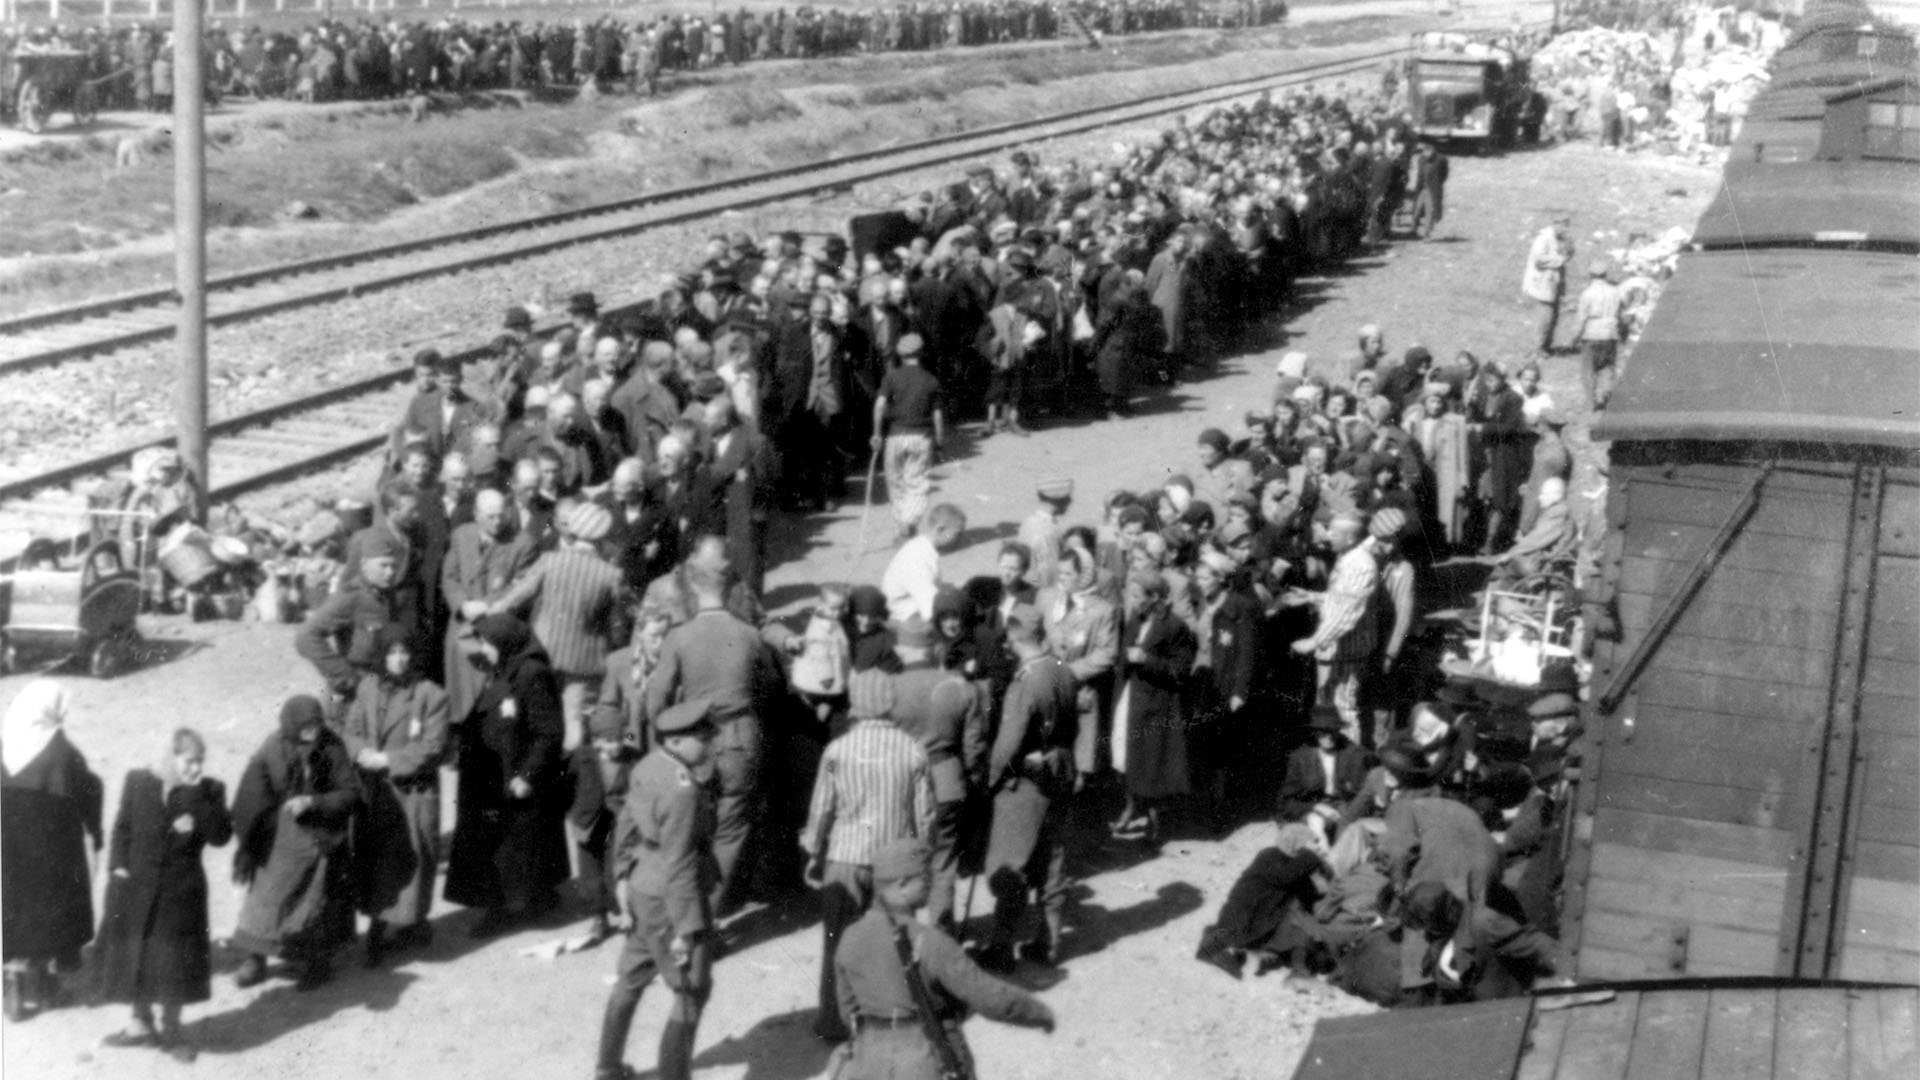 Victims of the Holocaust are herded off trains by Nazi officers at a death camp